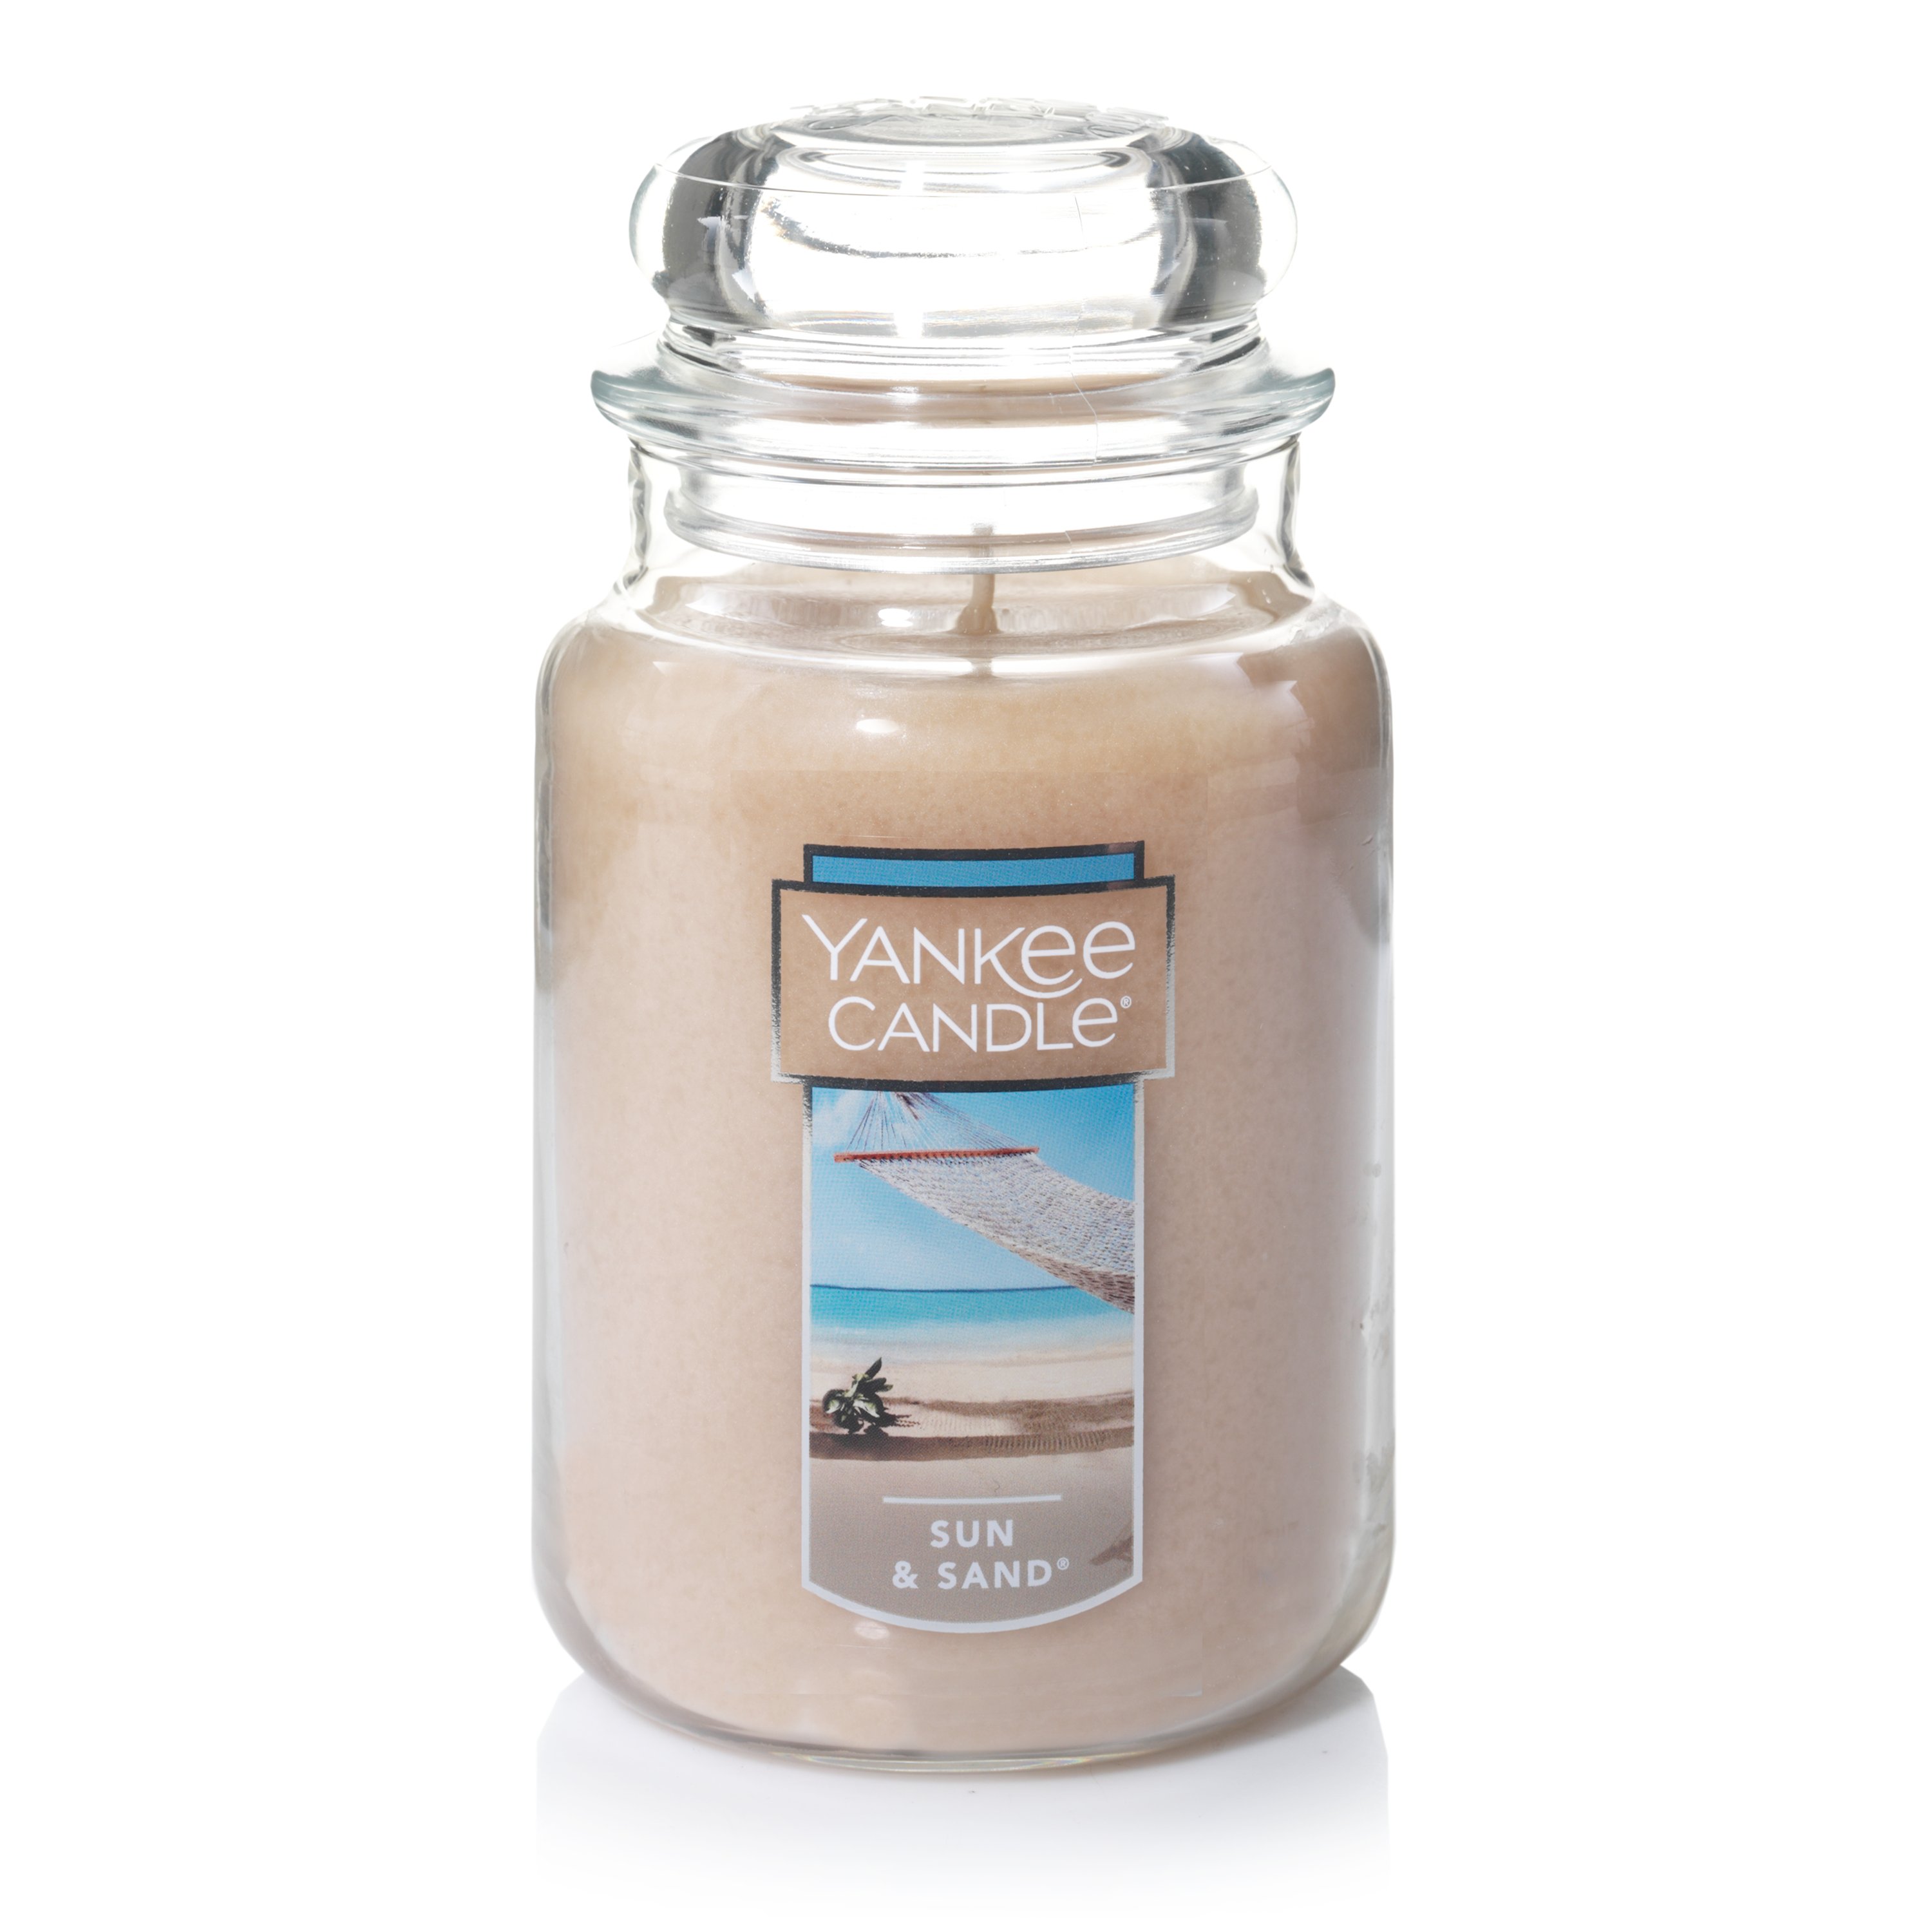 Yankee Candle Fresh Fragrance Collection Candle, Pink Sands - 1 candle, 22 oz